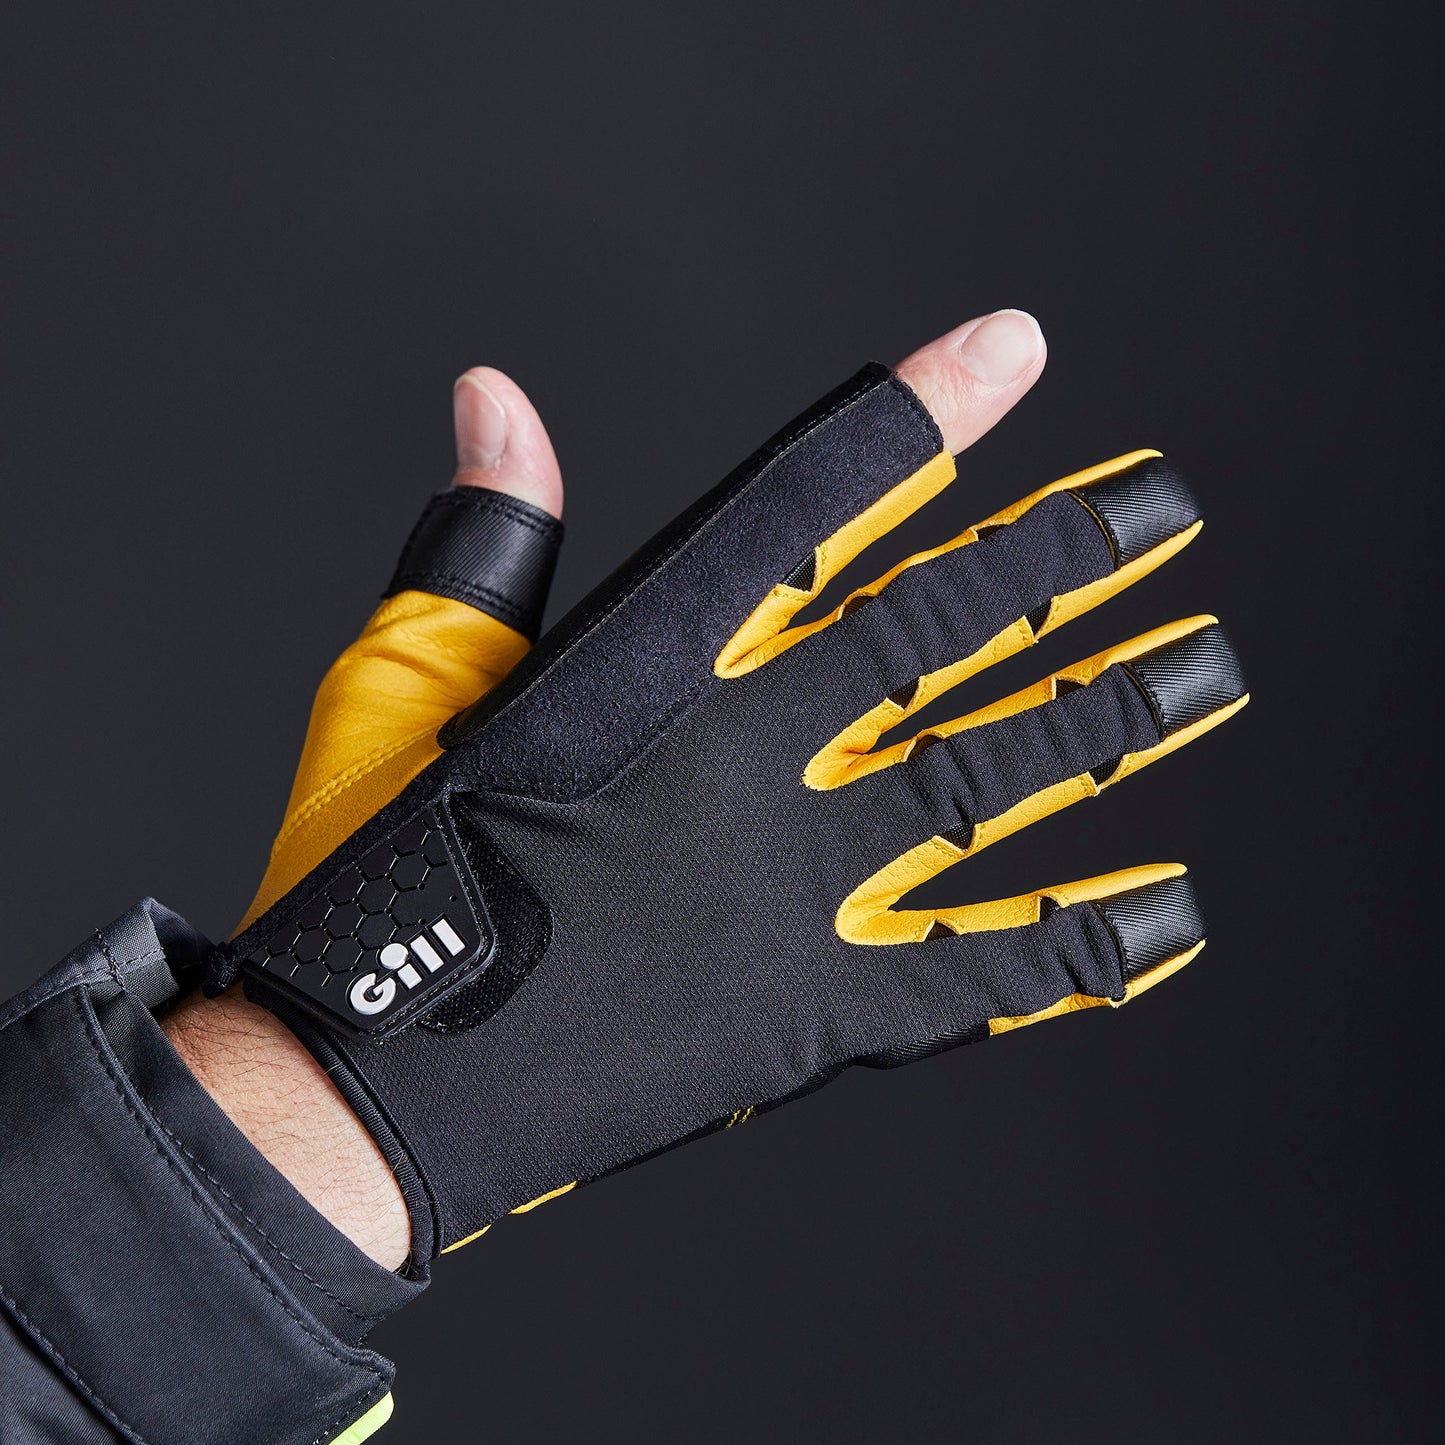 GILL Pro Gloves 7453-BLK01-XS